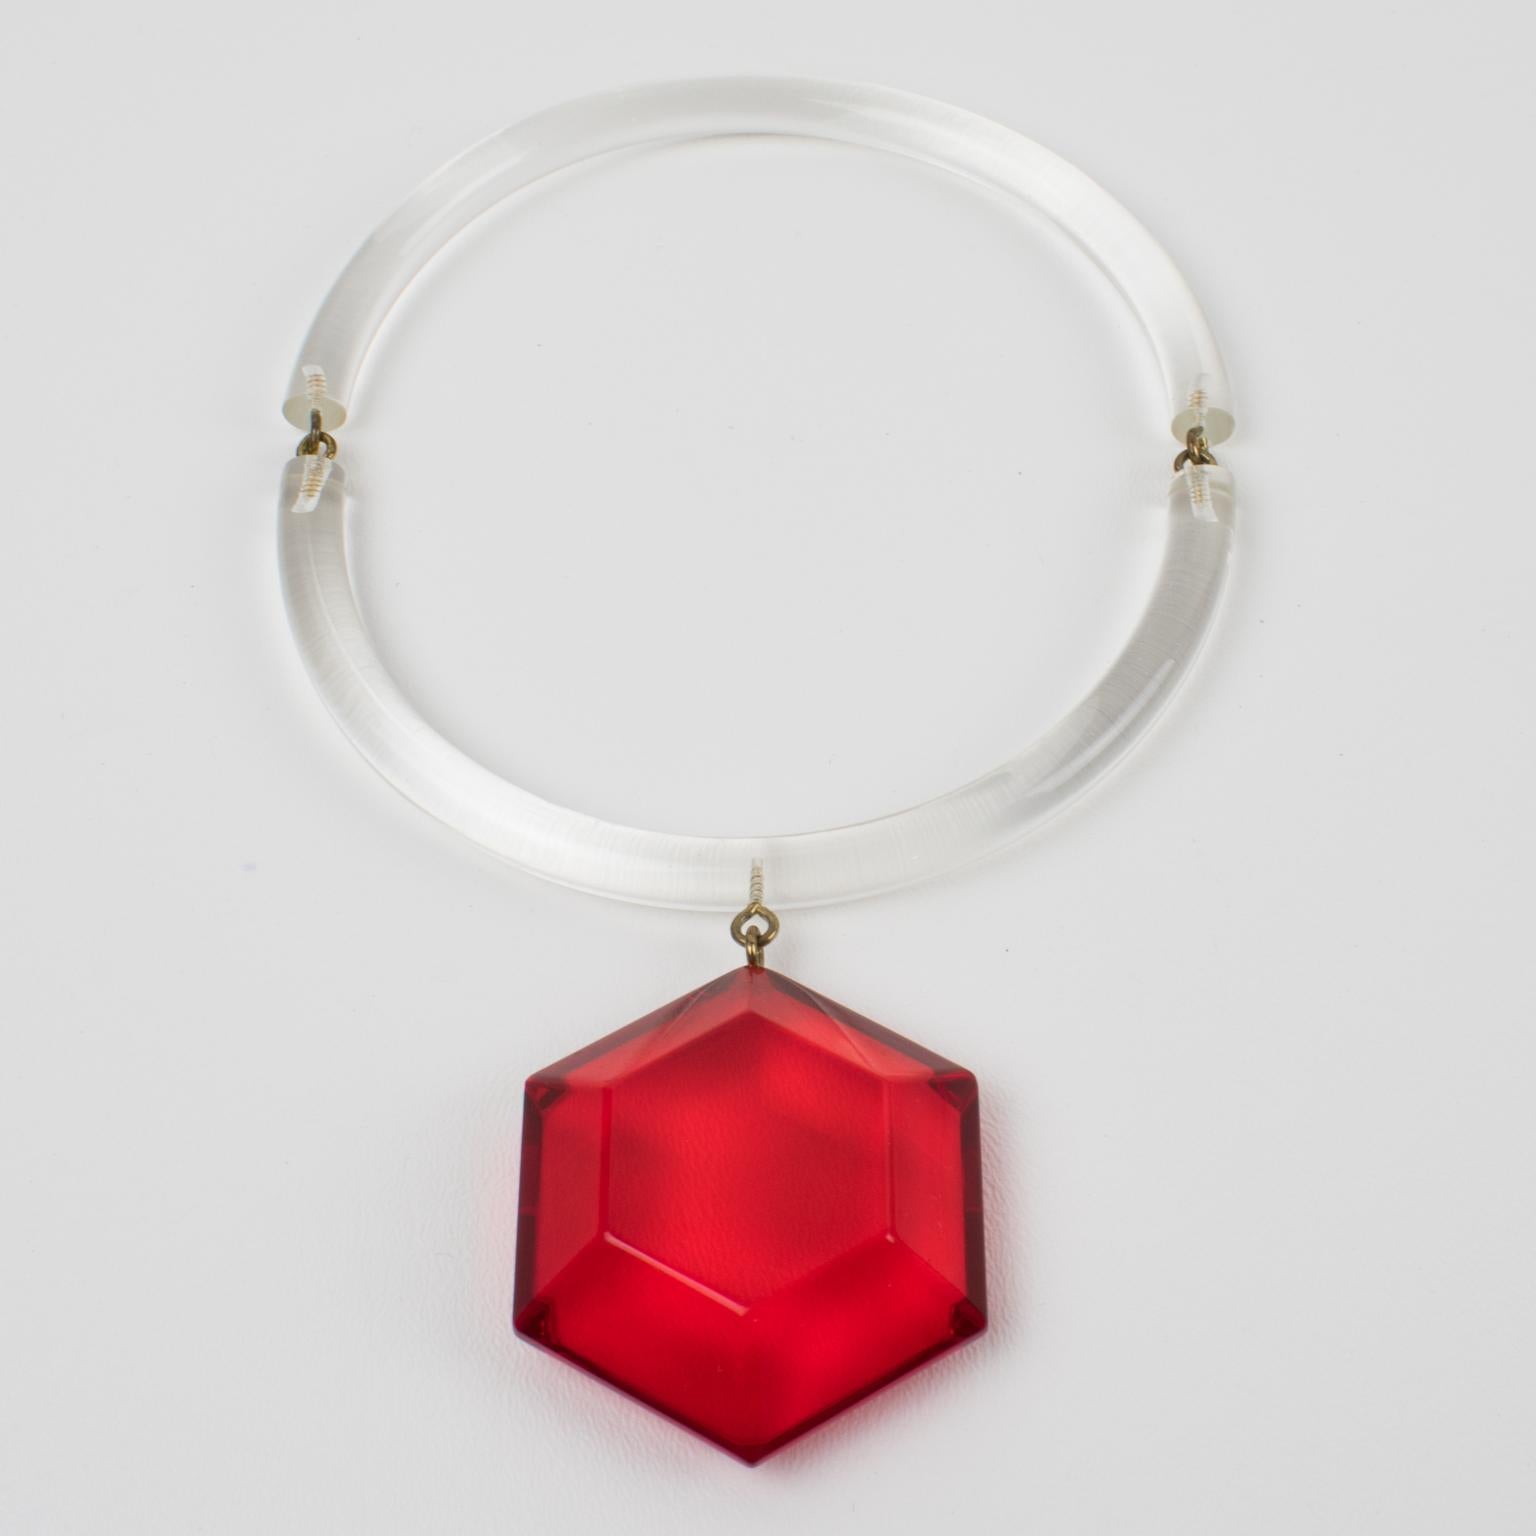 Women's Judith Hendler Acrylic Lucite Neck Ring Necklace with Red Pendant